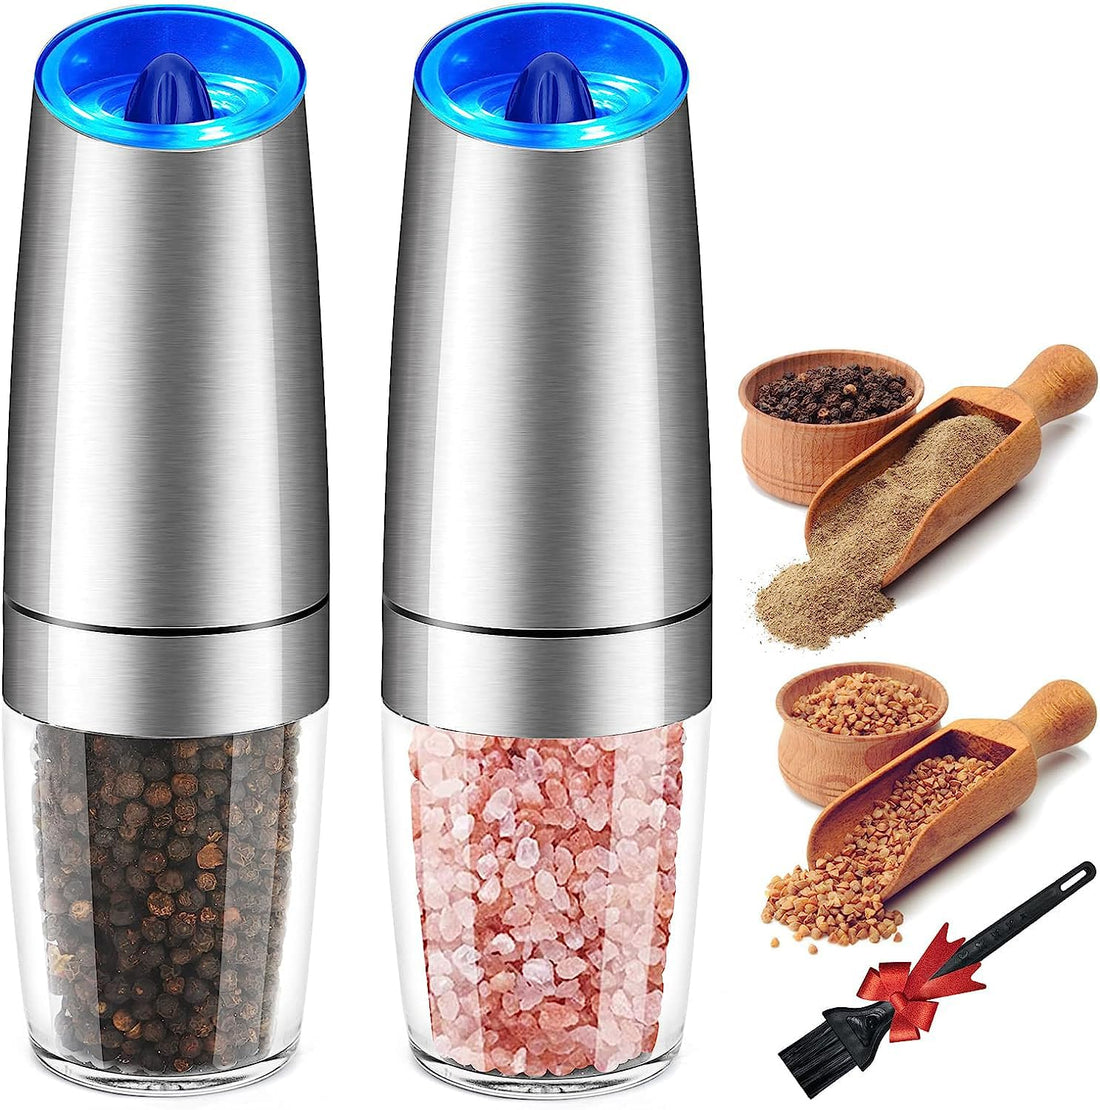 Enutogo Gravity Electric Pepper and Salt Grinder Set, Automatic Pepper Mill with Adjustable Coarseness, Battery Powered with LED Light, One Hand Operation, Stainless Steel, 2 Pack (Silver)